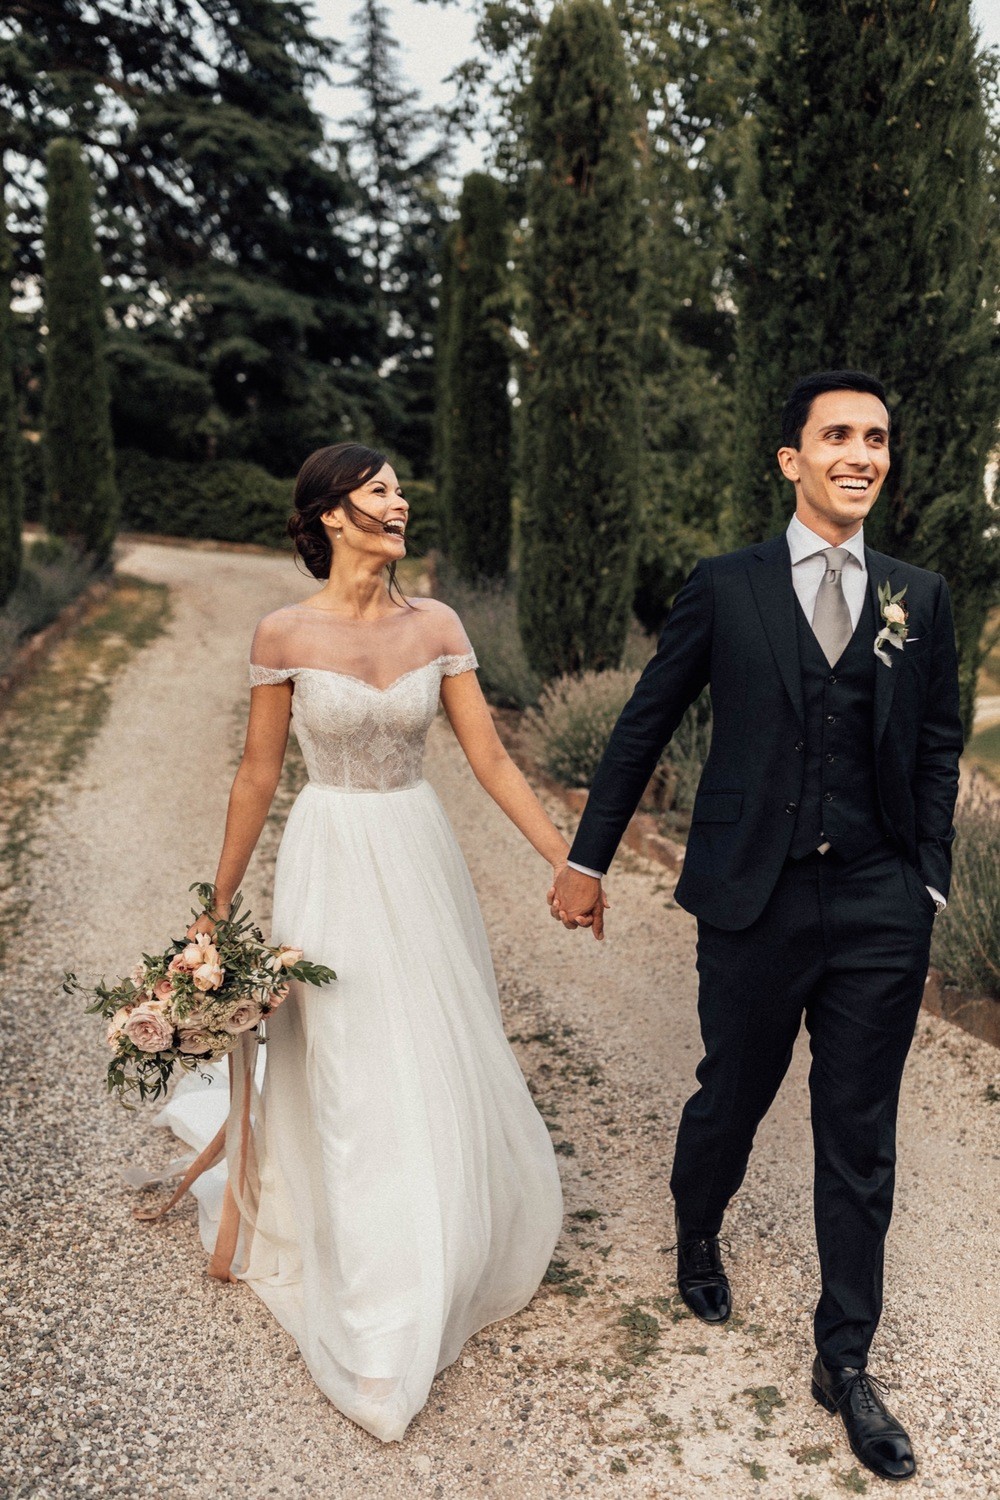 Romantic Northern Italy Castle Wedding with Warm Terracotta Hues ⋆ Ruffled